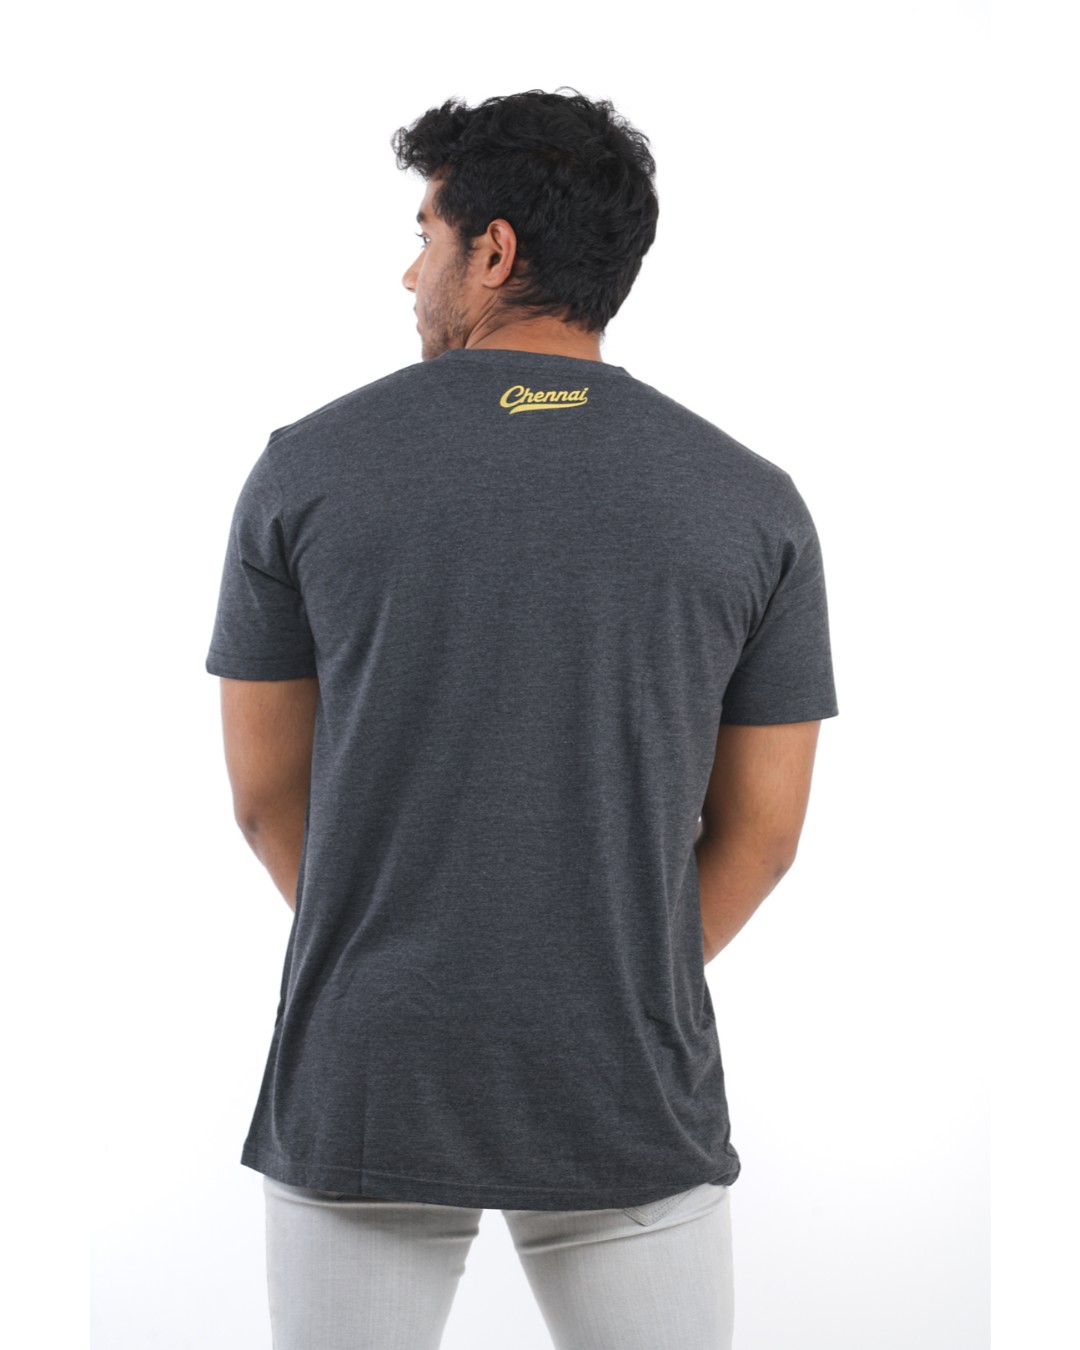 Shop Women's MADE IN MADRAS T-shirt in Charcoal-Back